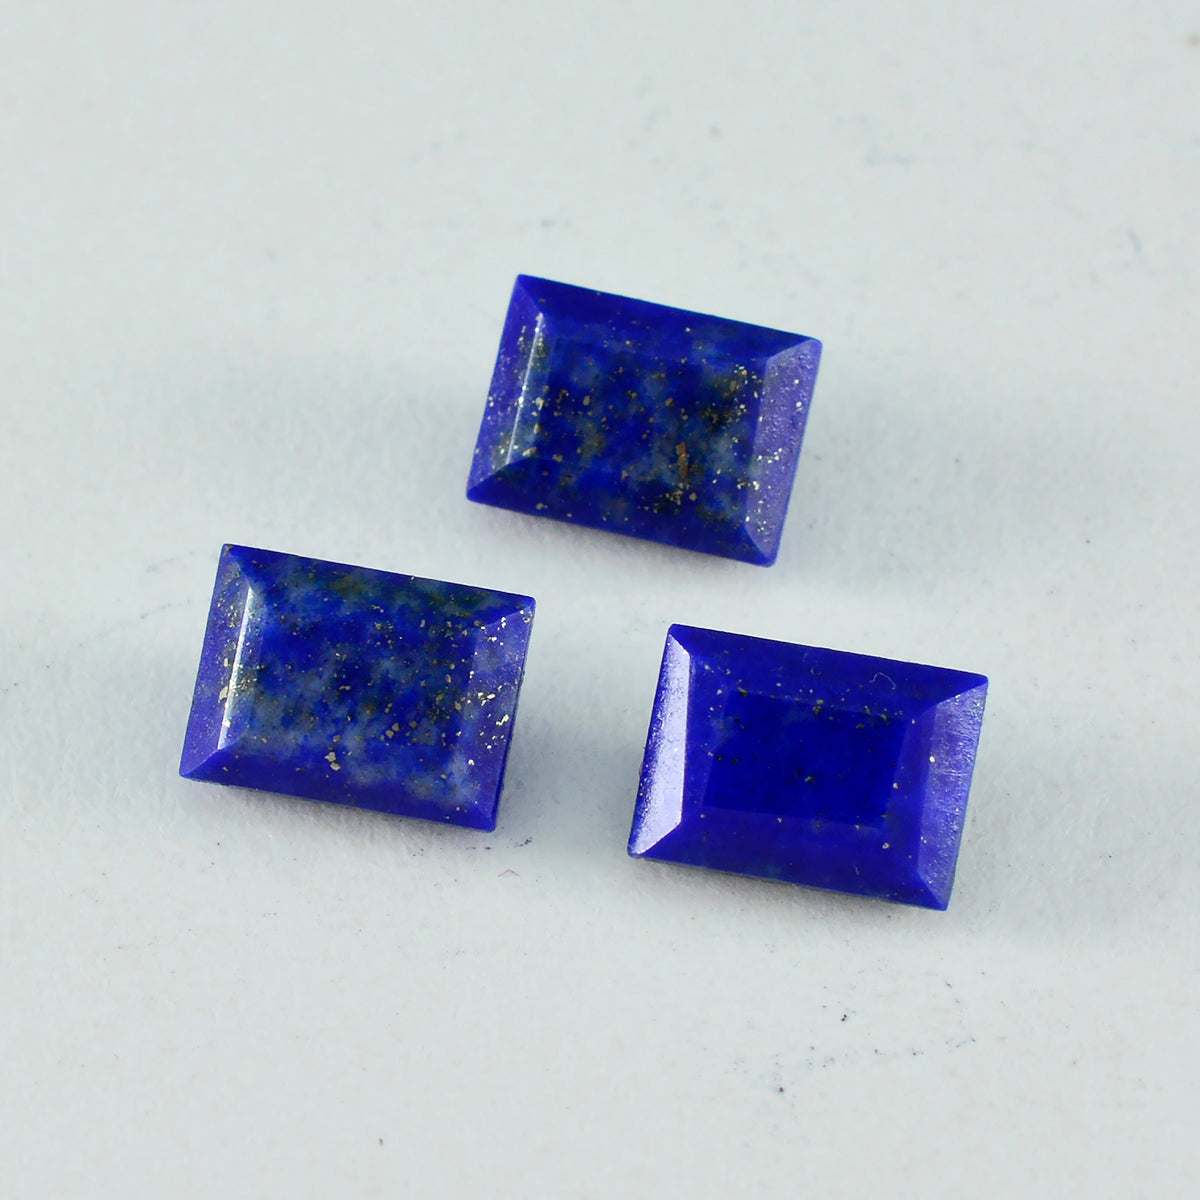 Riyogems 1PC Natural Blue Lapis Lazuli Faceted 9x11 mm Octagon Shape nice-looking Quality Loose Stone